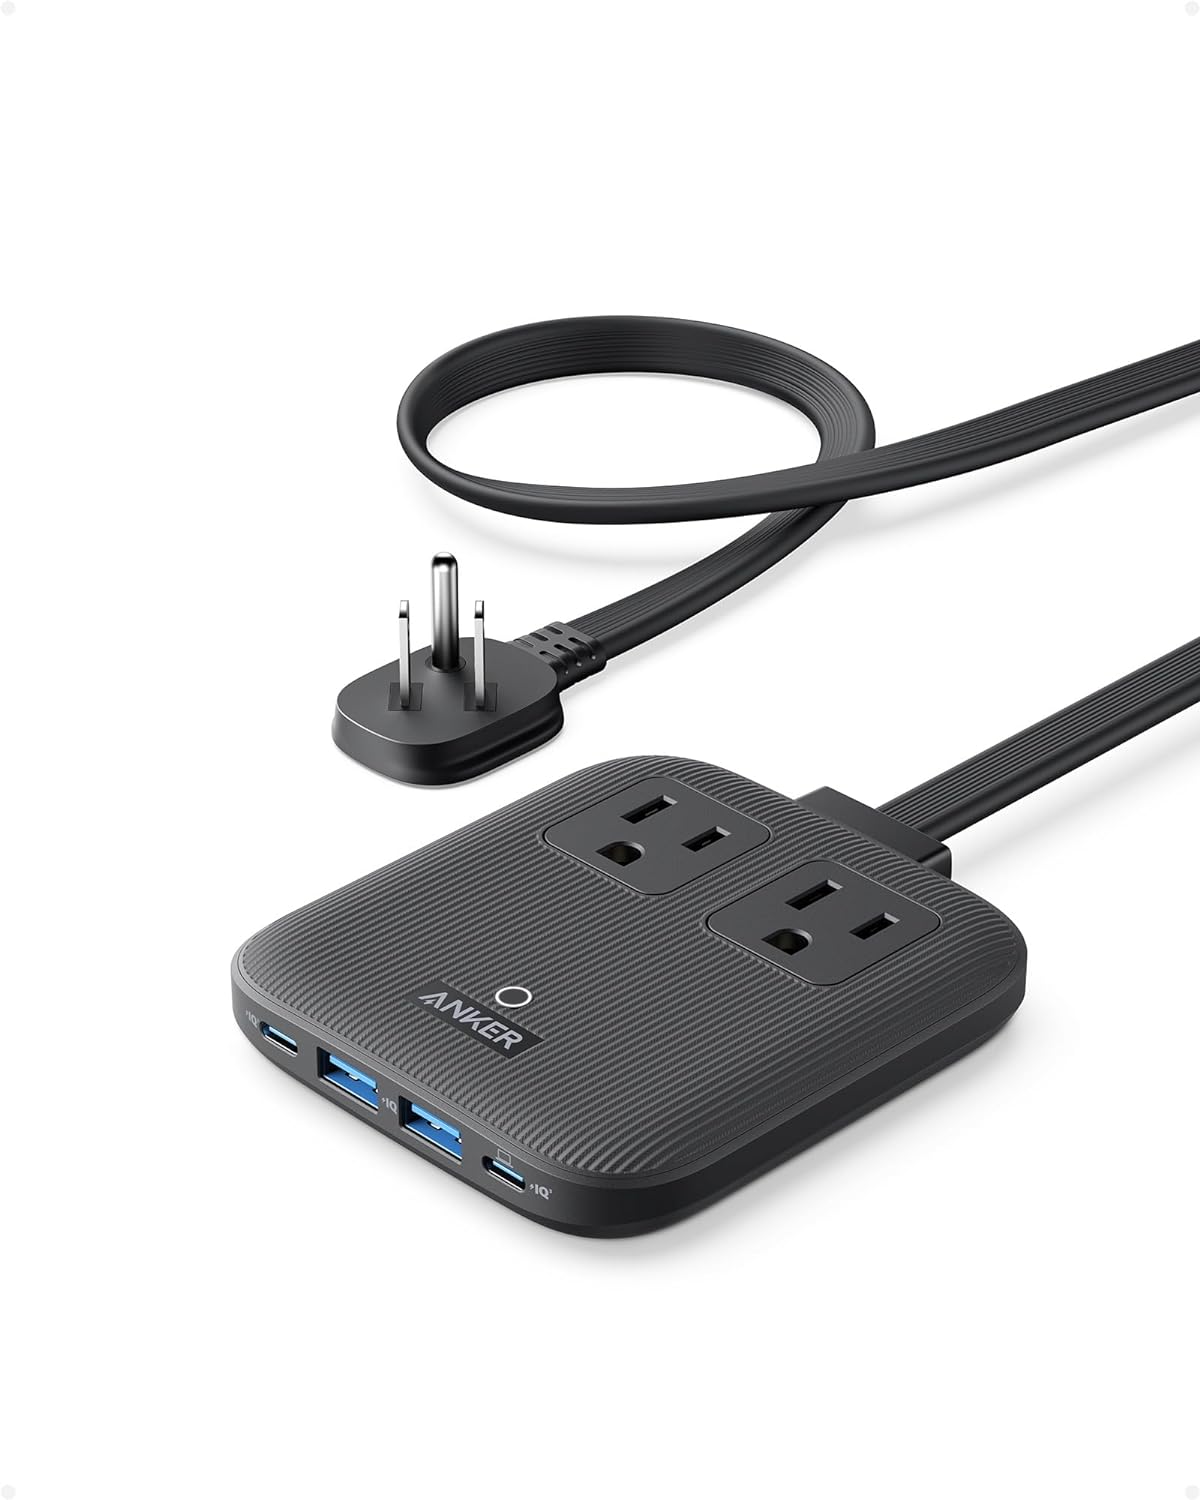 Anker Nano Charging Station (67W Max), 6-in-1 USB C Power Strip, with Flat Plug and 5ft Thin Undetachable Extension Cord,2 AC, 2 USB A, 2 USB C.(Black Stone)